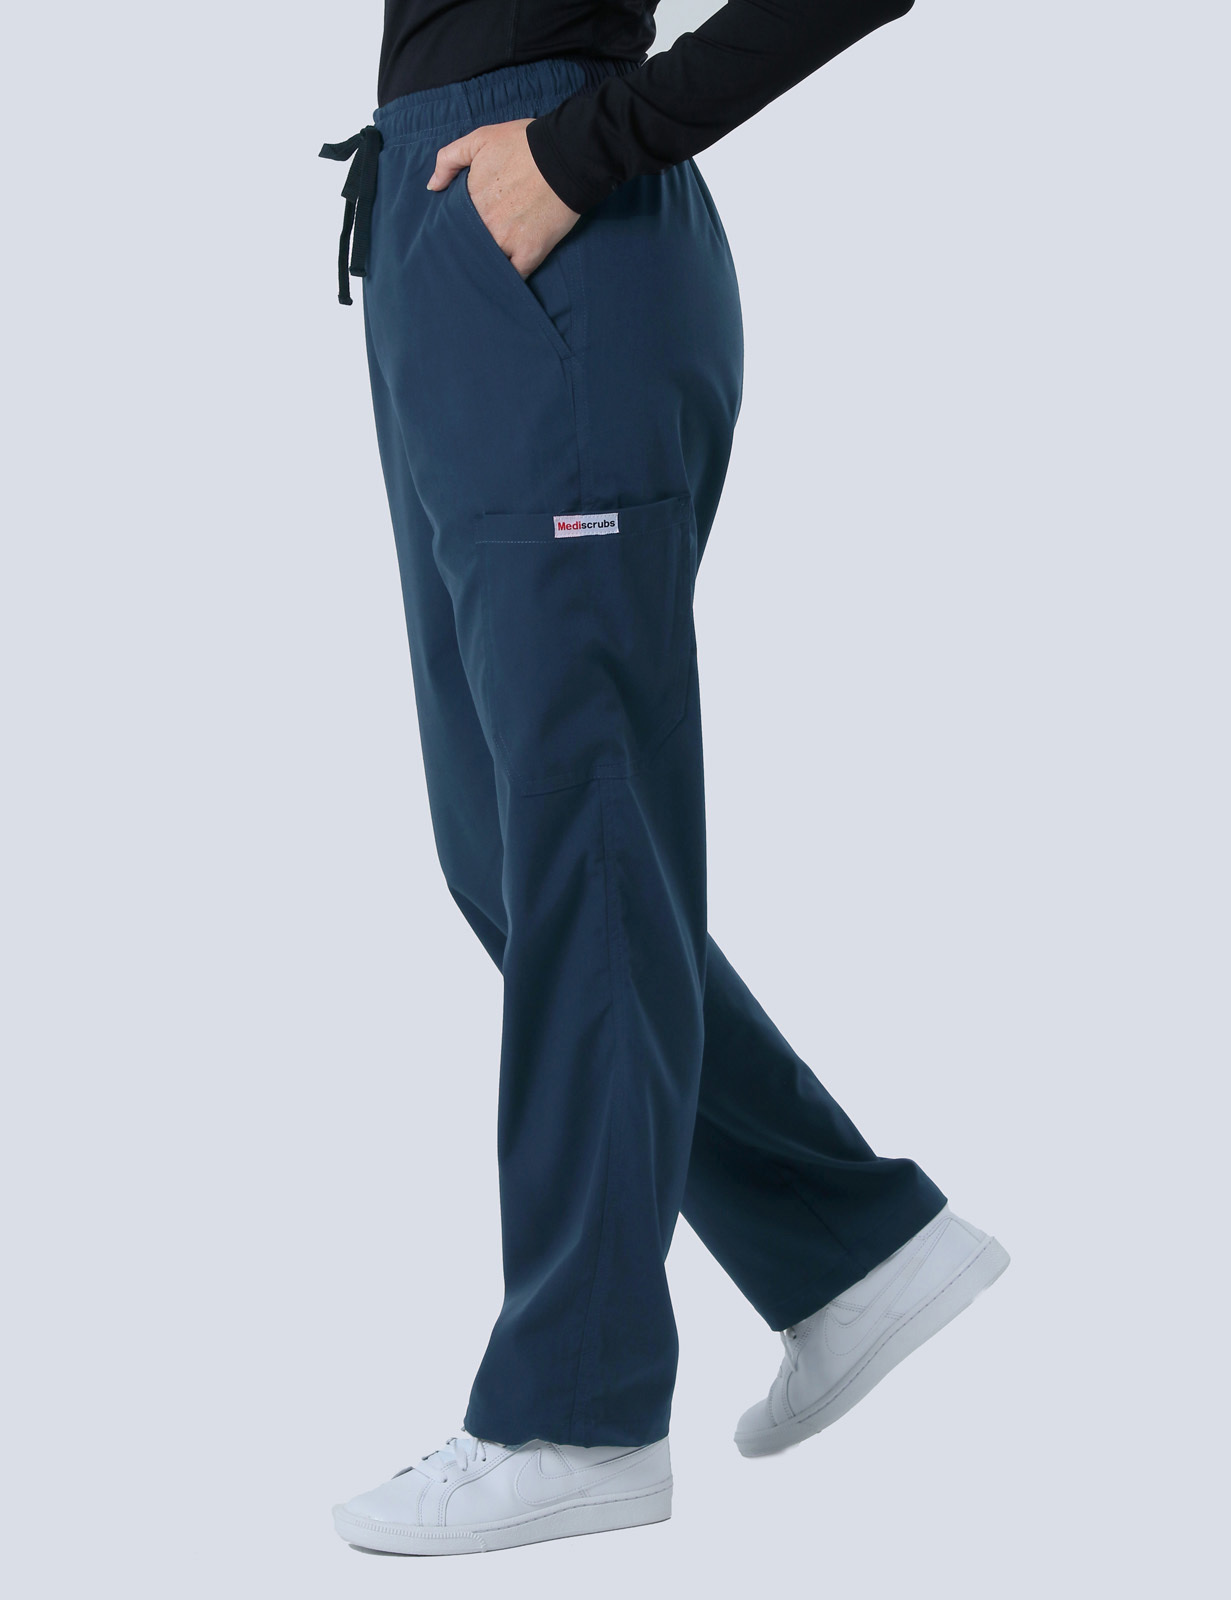 Hobart Private Hospital - Emergency Department (4 Pocket Scrub Top and Cargo Pants in Navy incl Logos)